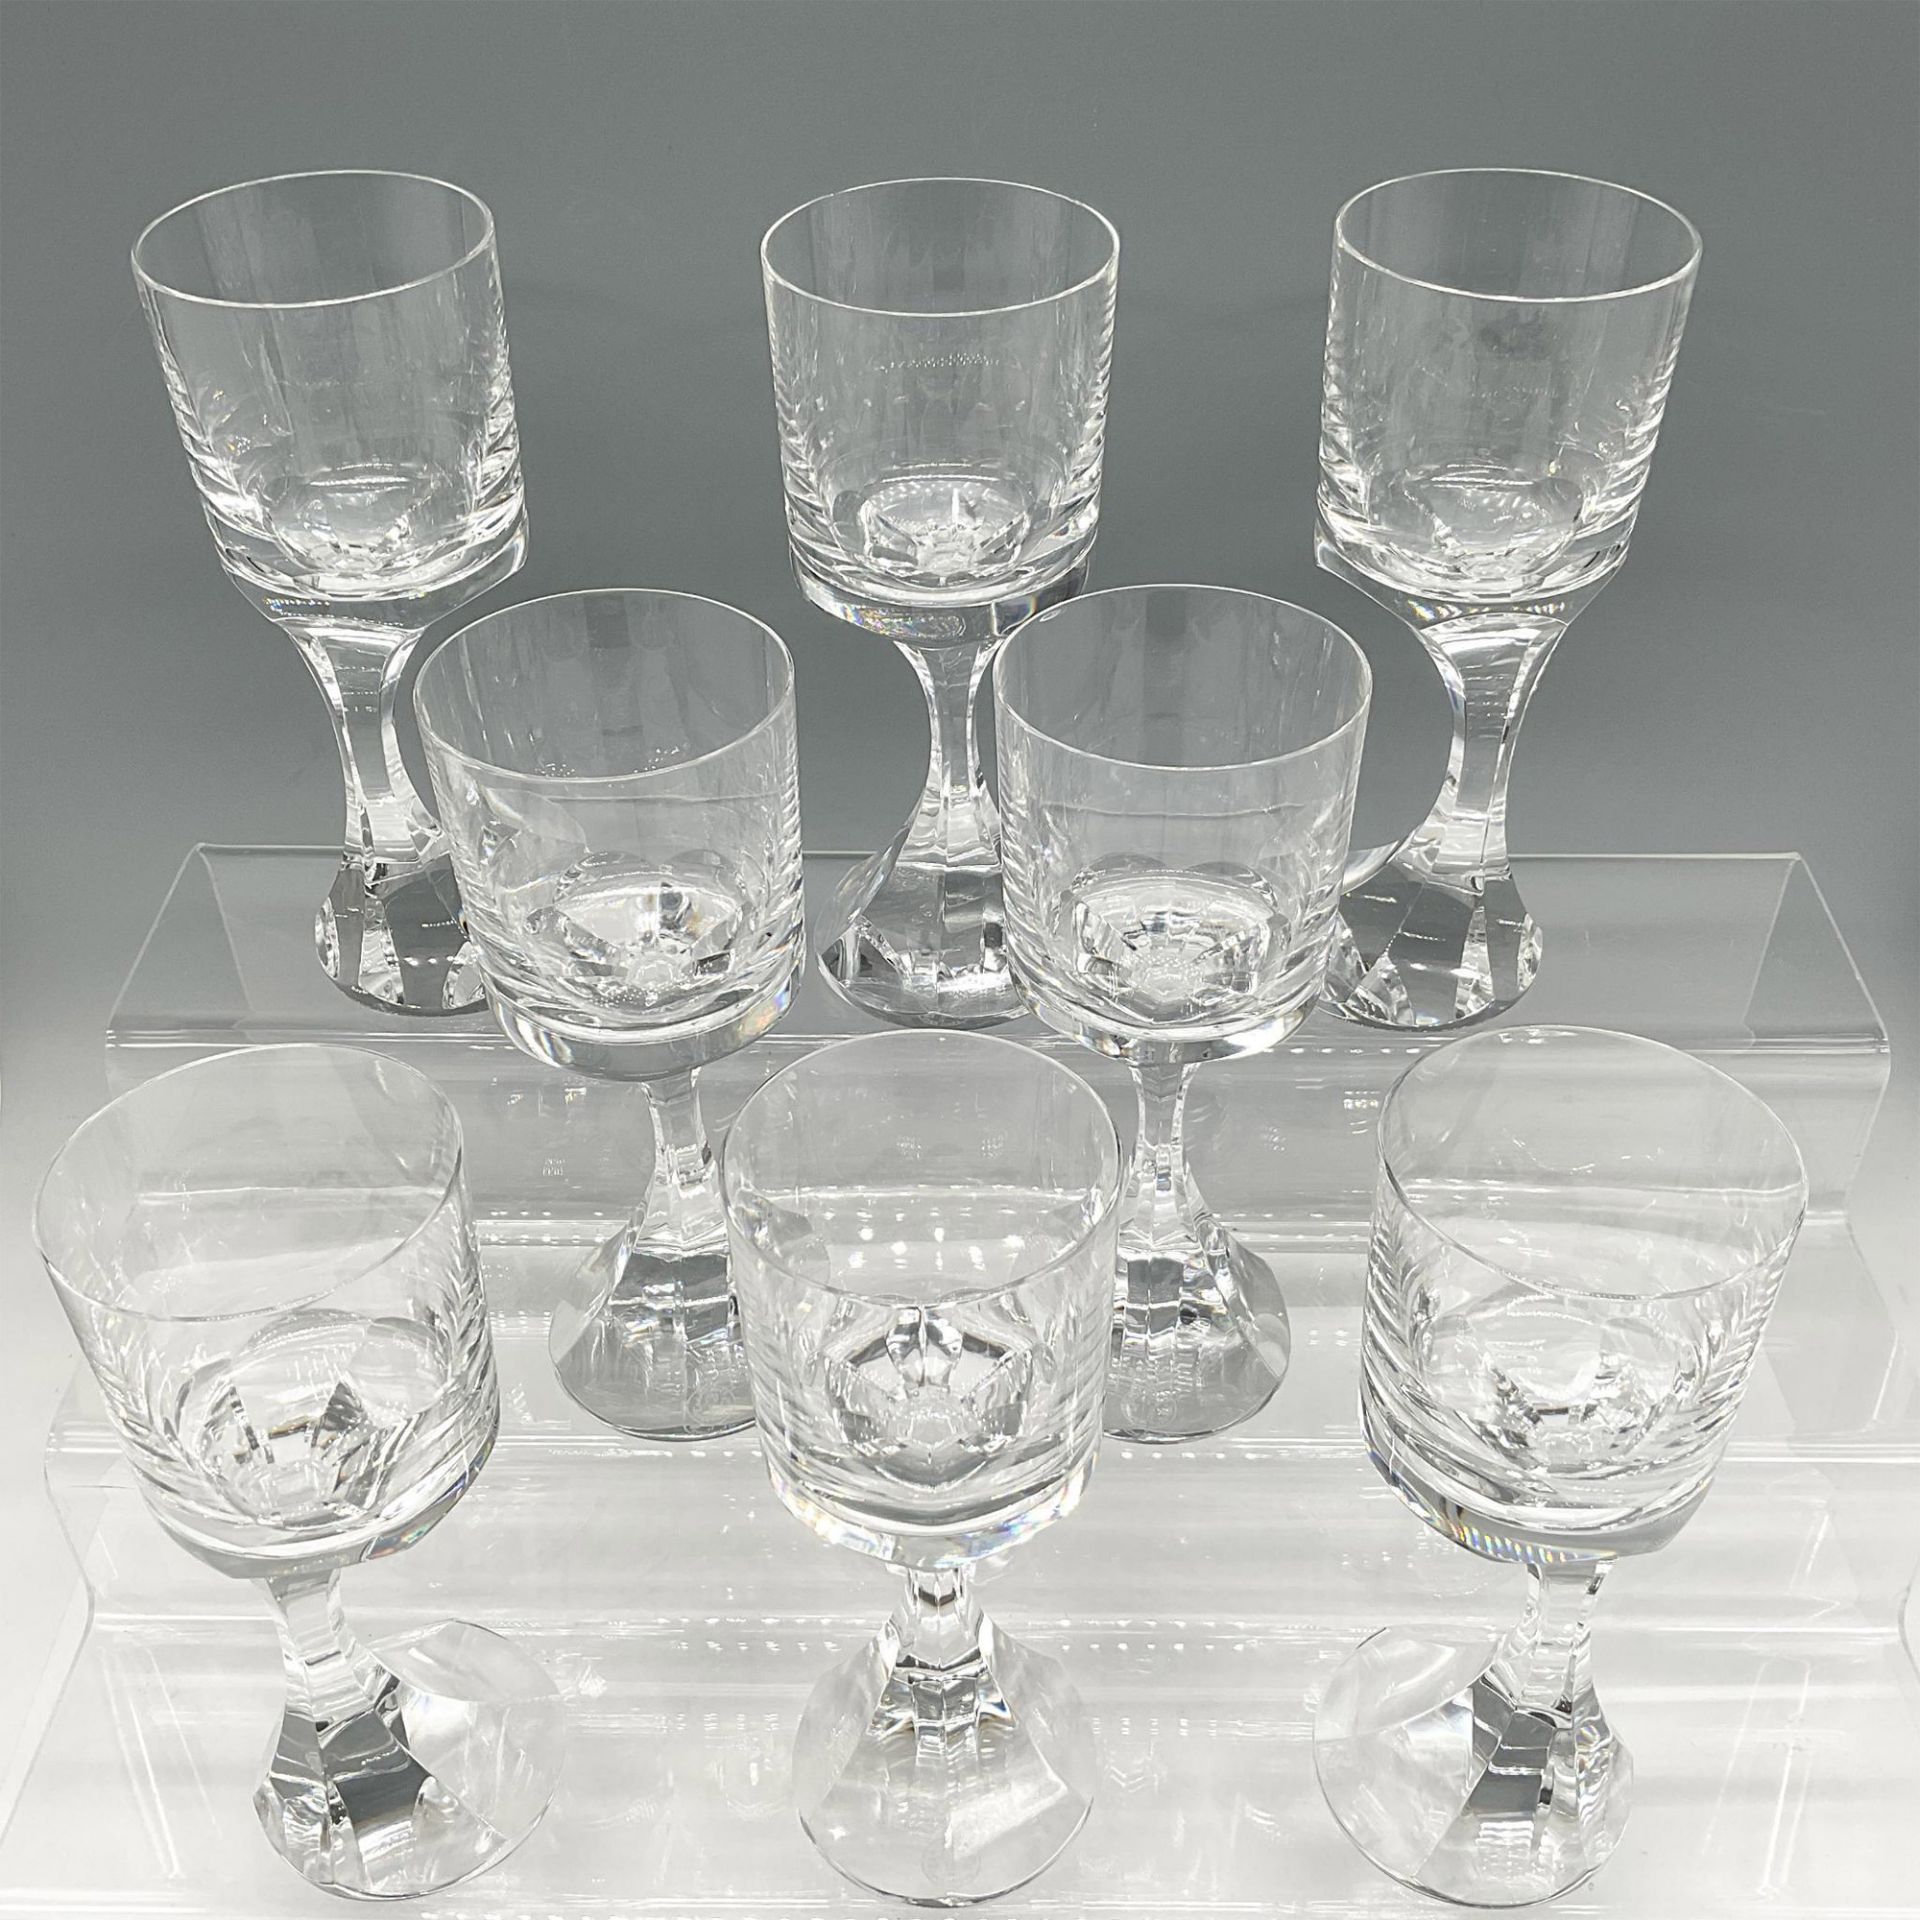 8pc Baccarat Crystal Red Wine Glasses, Narcisse - Image 2 of 3